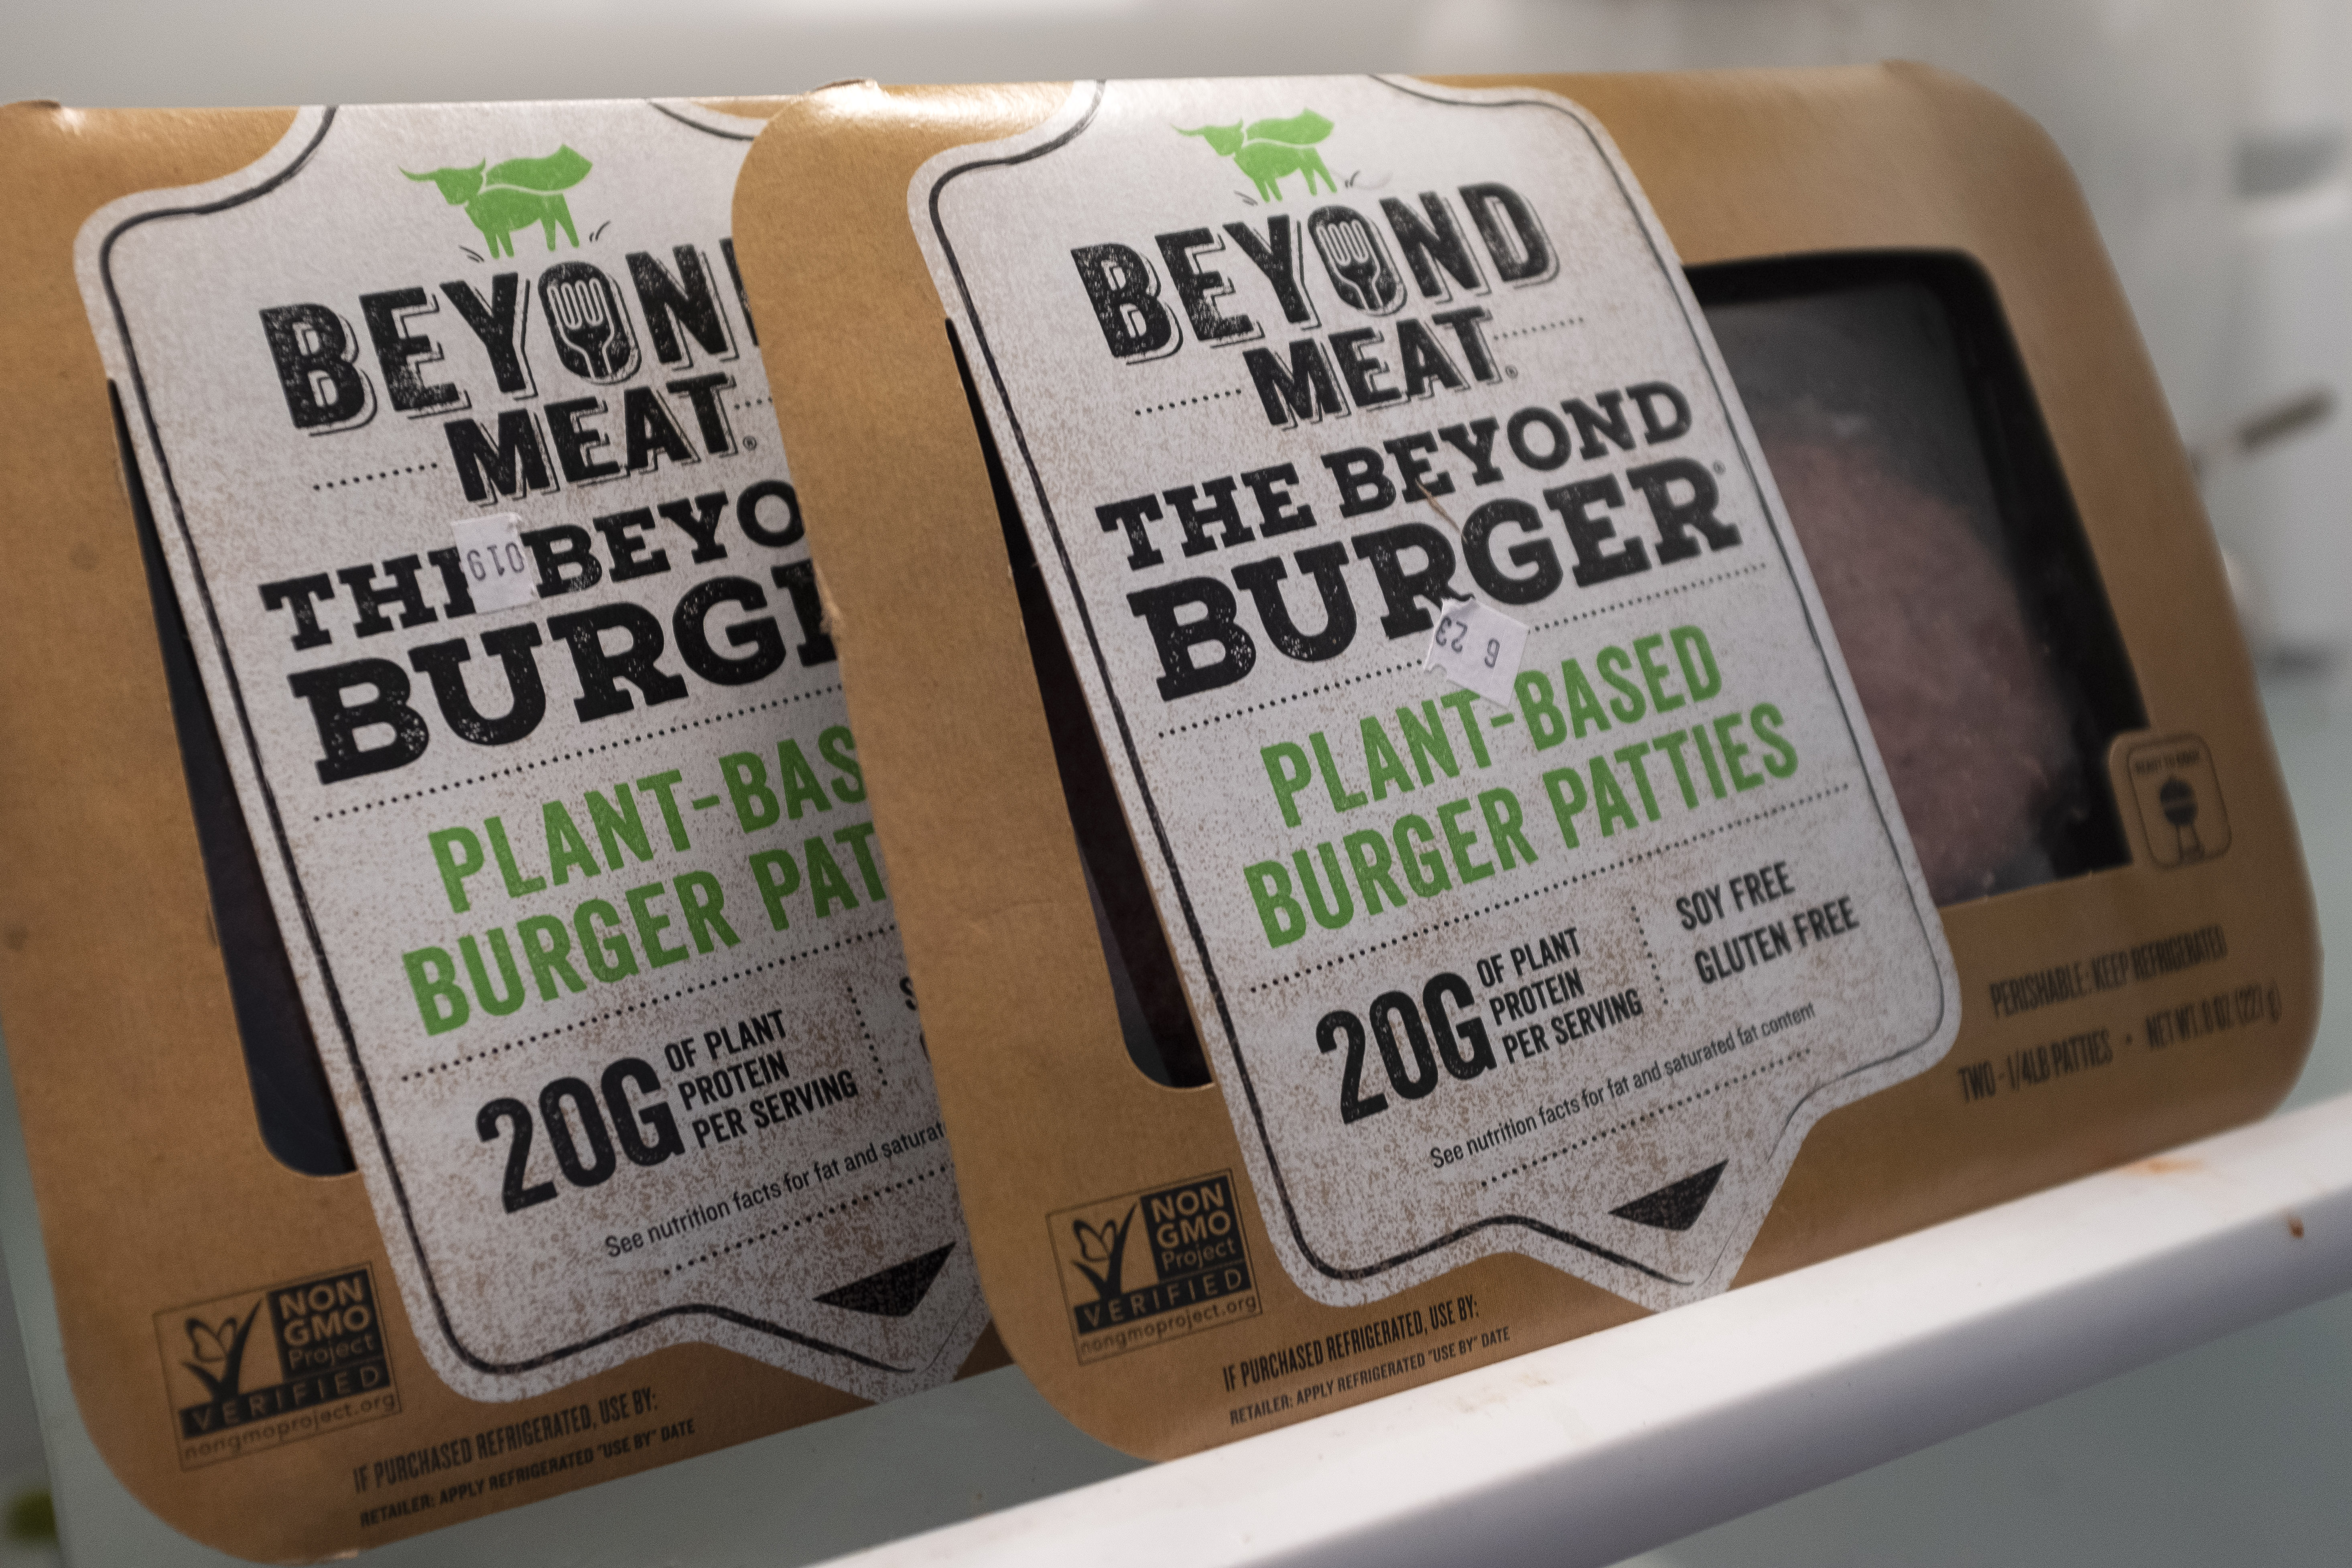 beyond meat stock price history